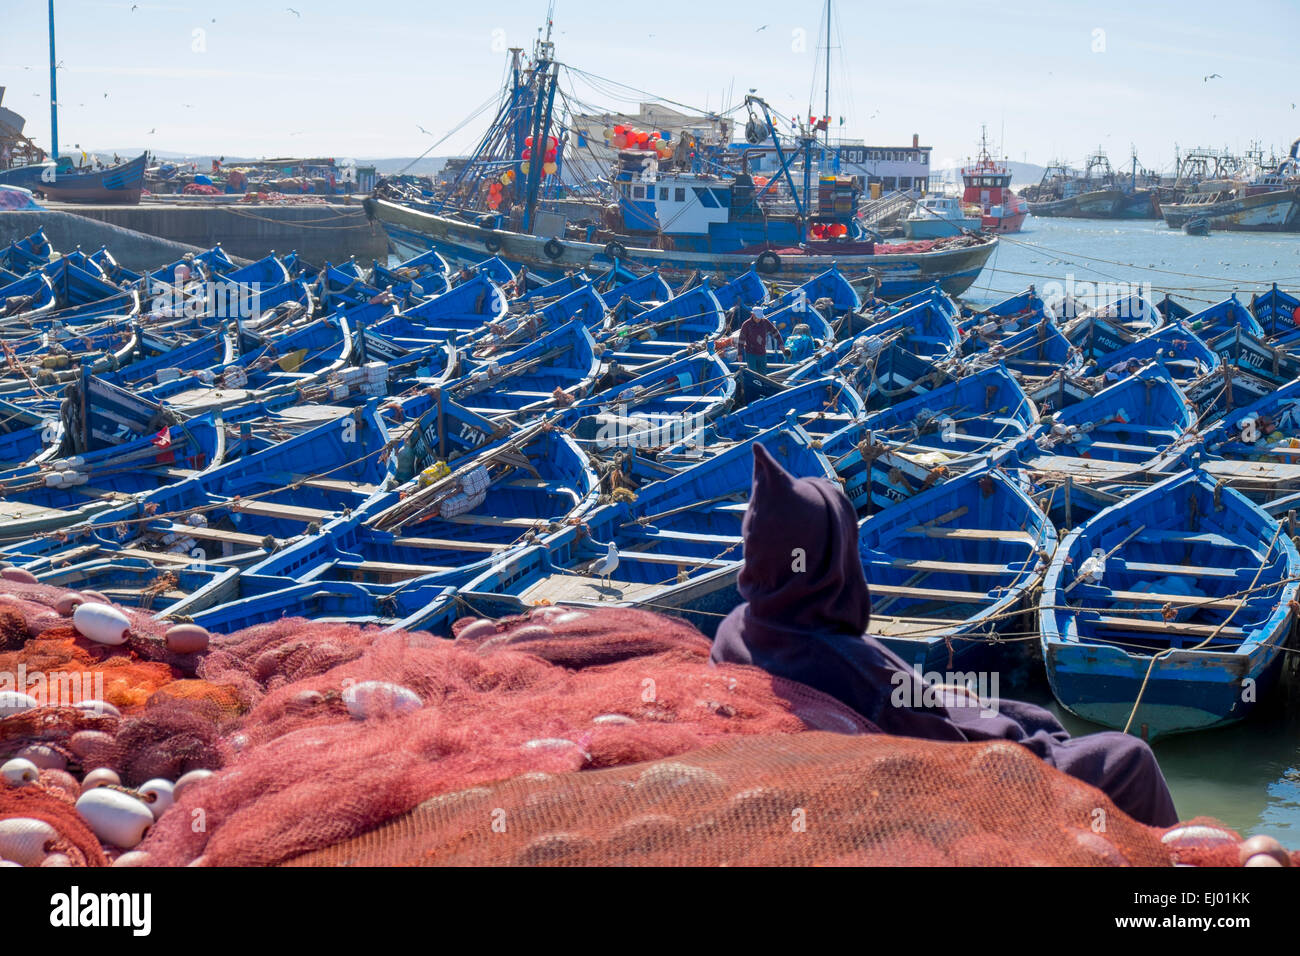 Fishing boats and man in traditional dress in the harbour at Essaouira, Morocco, North Africa Stock Photo